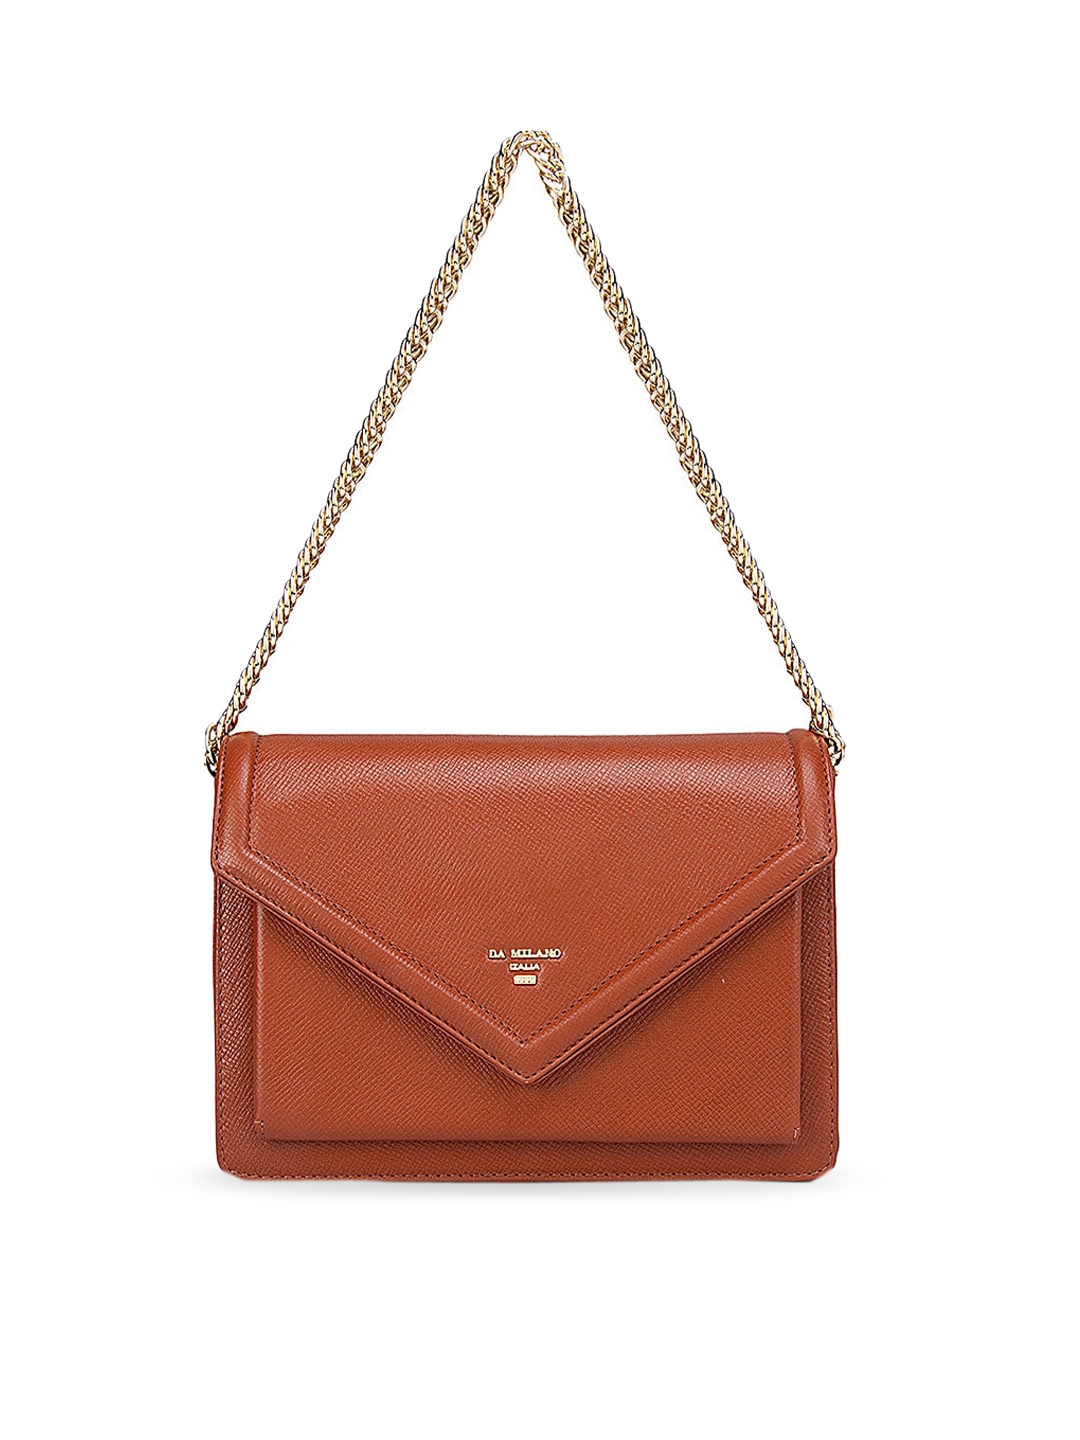 Da Milano Rust Leather Structured Sling Bag